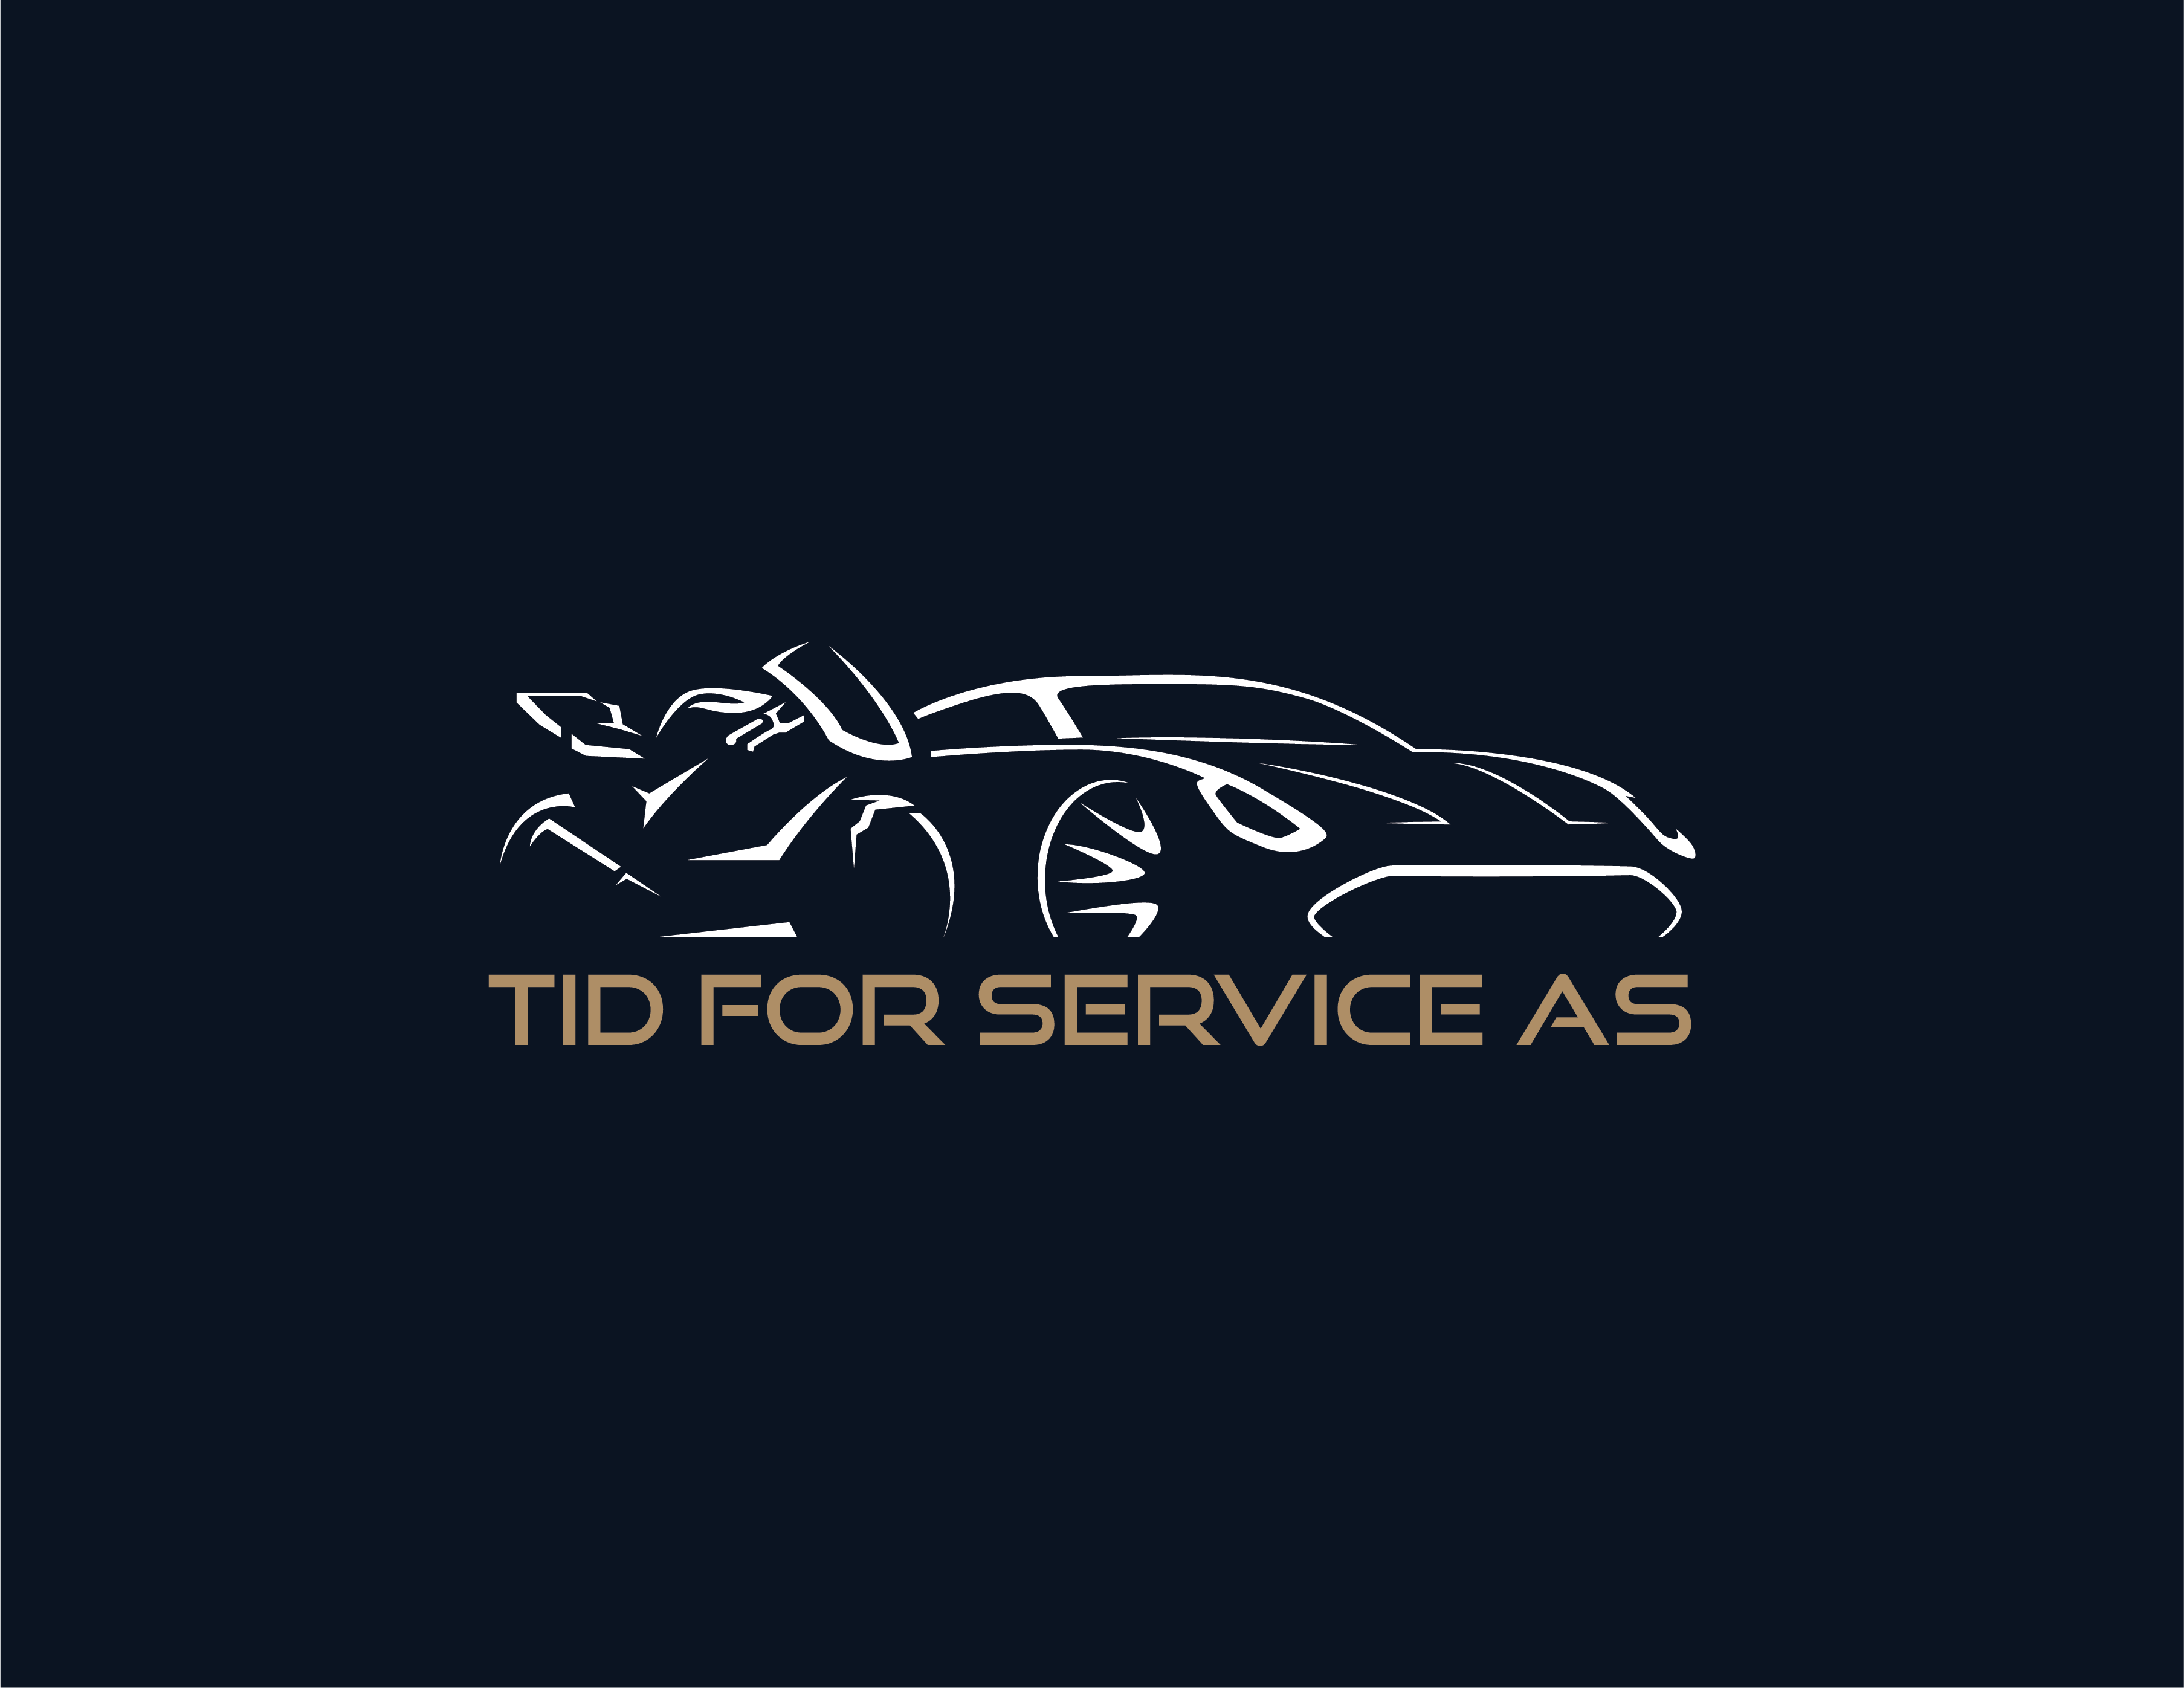 Tid For Service AS